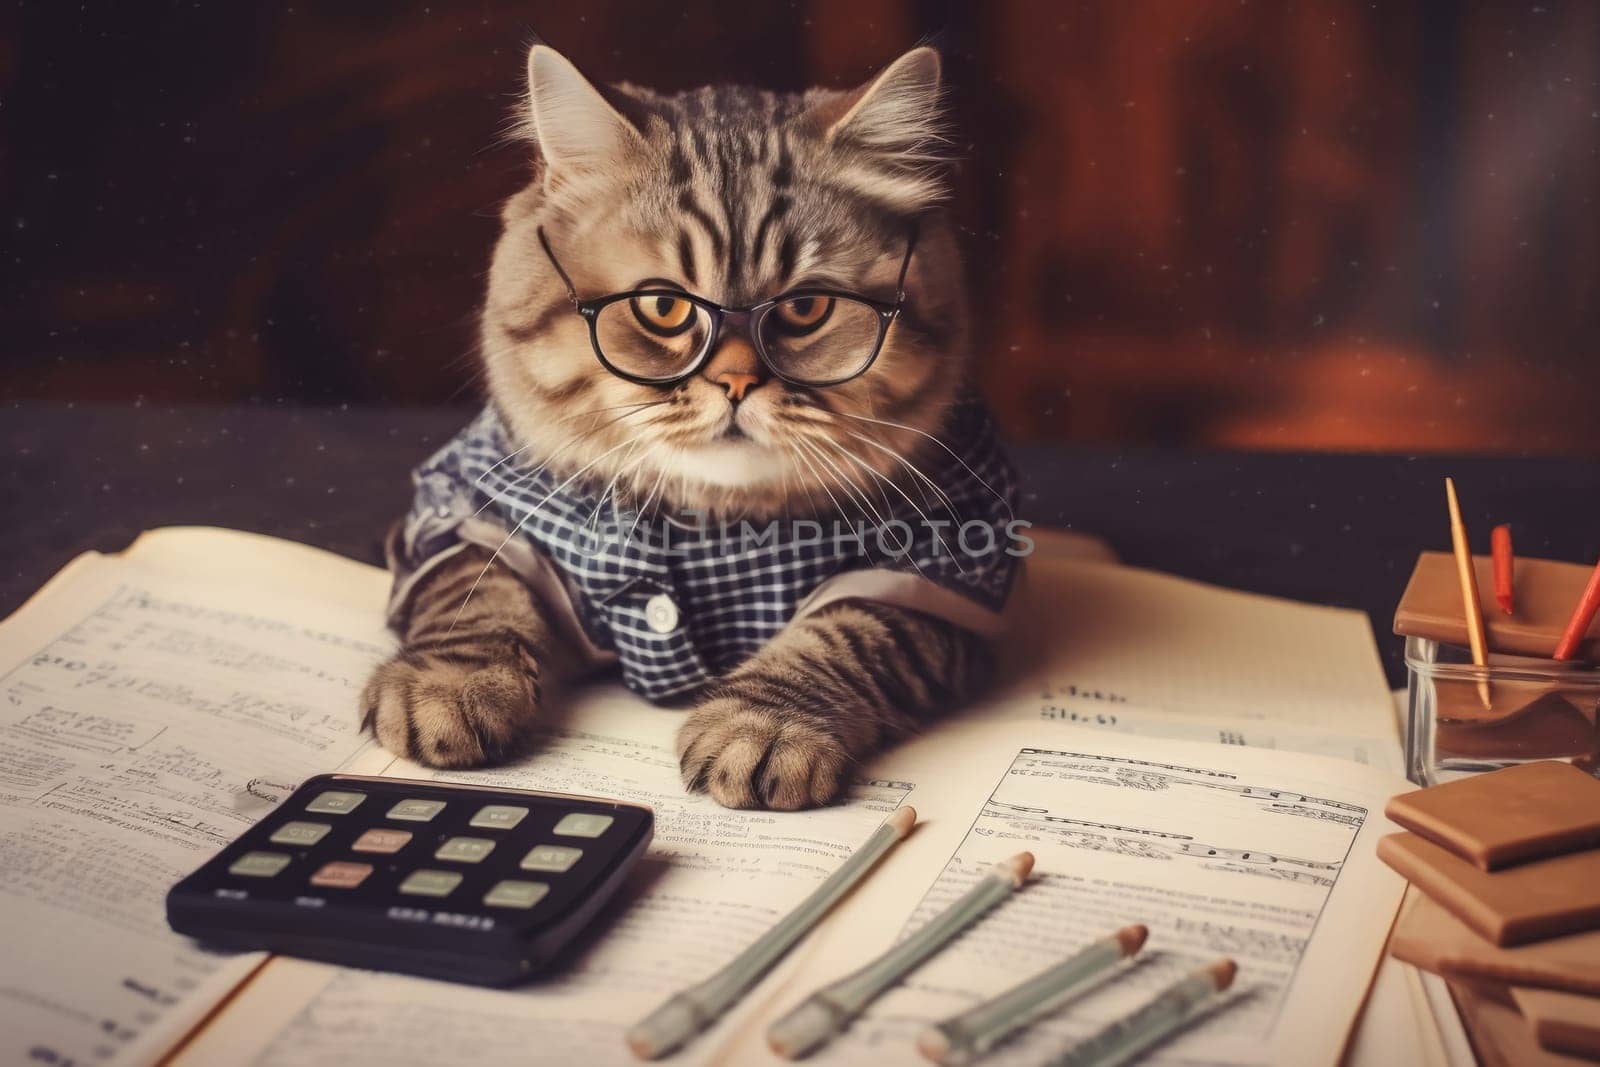 A charming tabby cat with striking glasses sits at a wooden desk, ledger book open, as it humorously pretends to manage finances, invoking a sense of meticulous budgeting with a whimsical twist